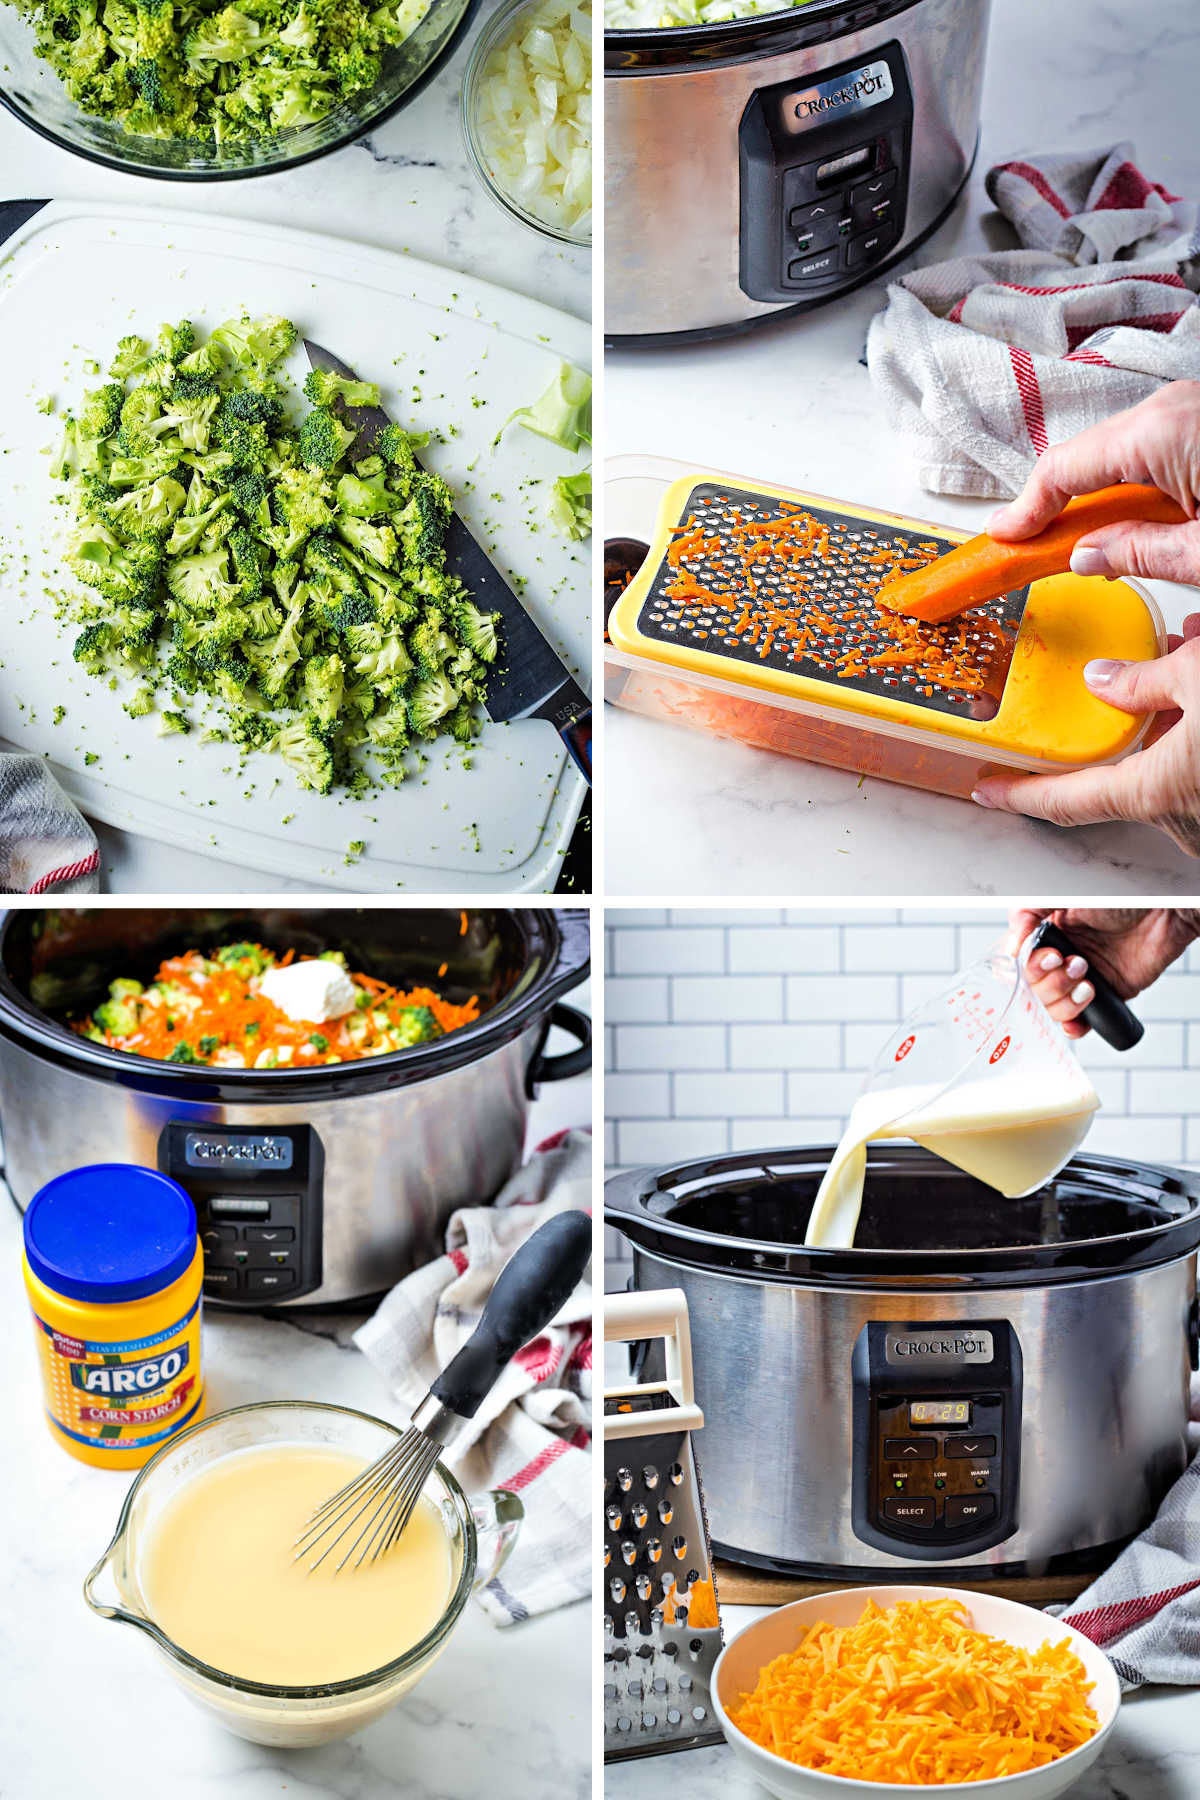 process steps for making crockpot broccoli cheddar soup: chop broccoli; grate carrot; whisk cornstarch into chicken broth; add milk and shredded cheddar cheese.